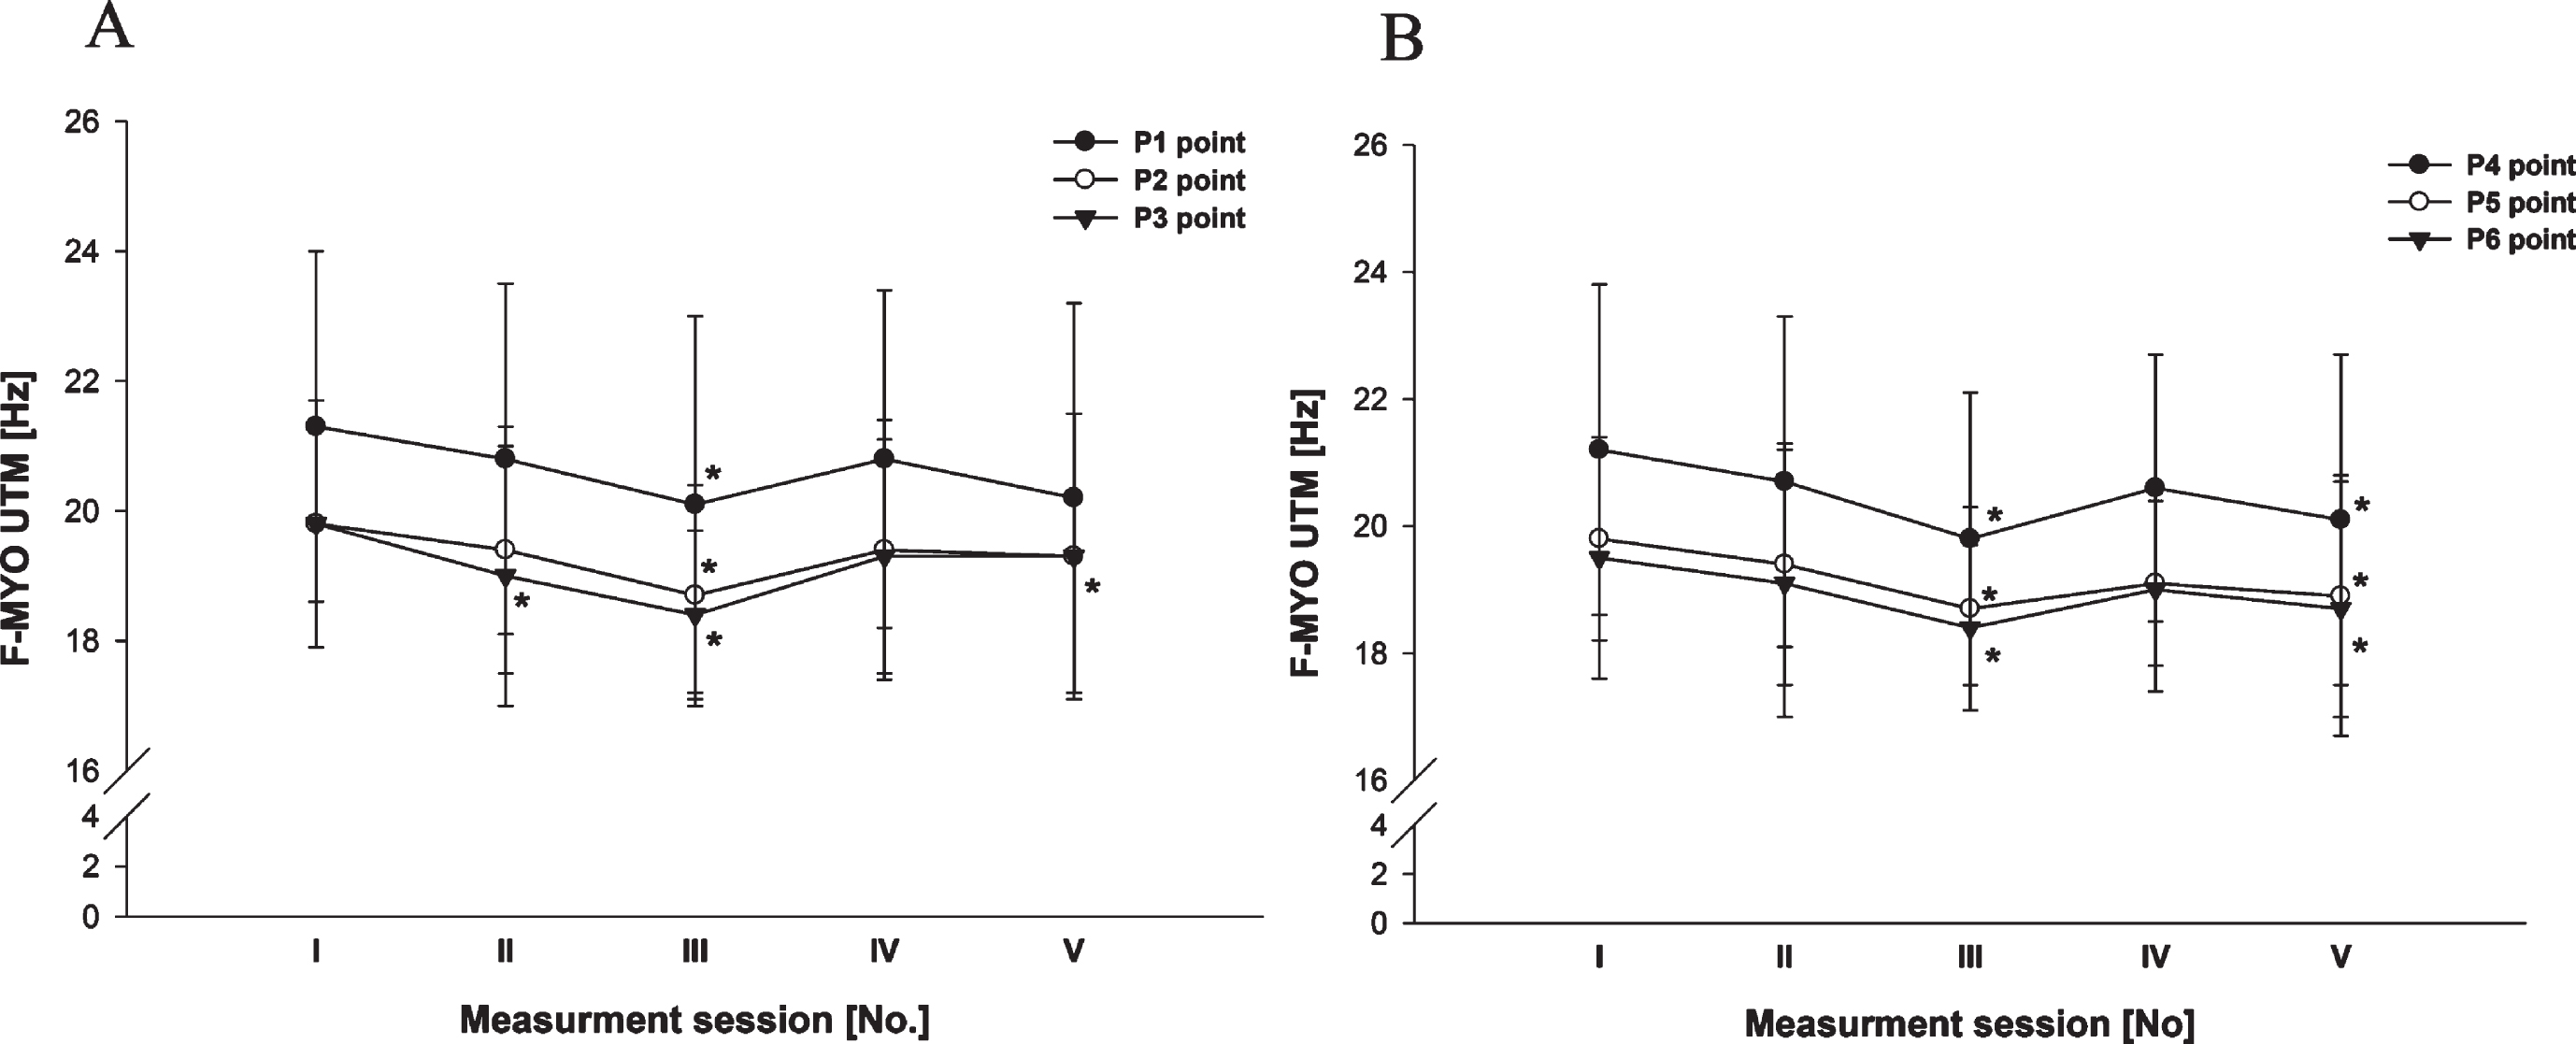 Myotonometric frequency (F-MYO, [Hz]) values in the tested P1-P6 points at the left (A) and the right (B) side upper trapezius muscle. Data are expressed as mean (SD). * - statistically significant difference (p≤0.001) compared to the pre-1’st therapy measurement session value in the post hoc analysis.